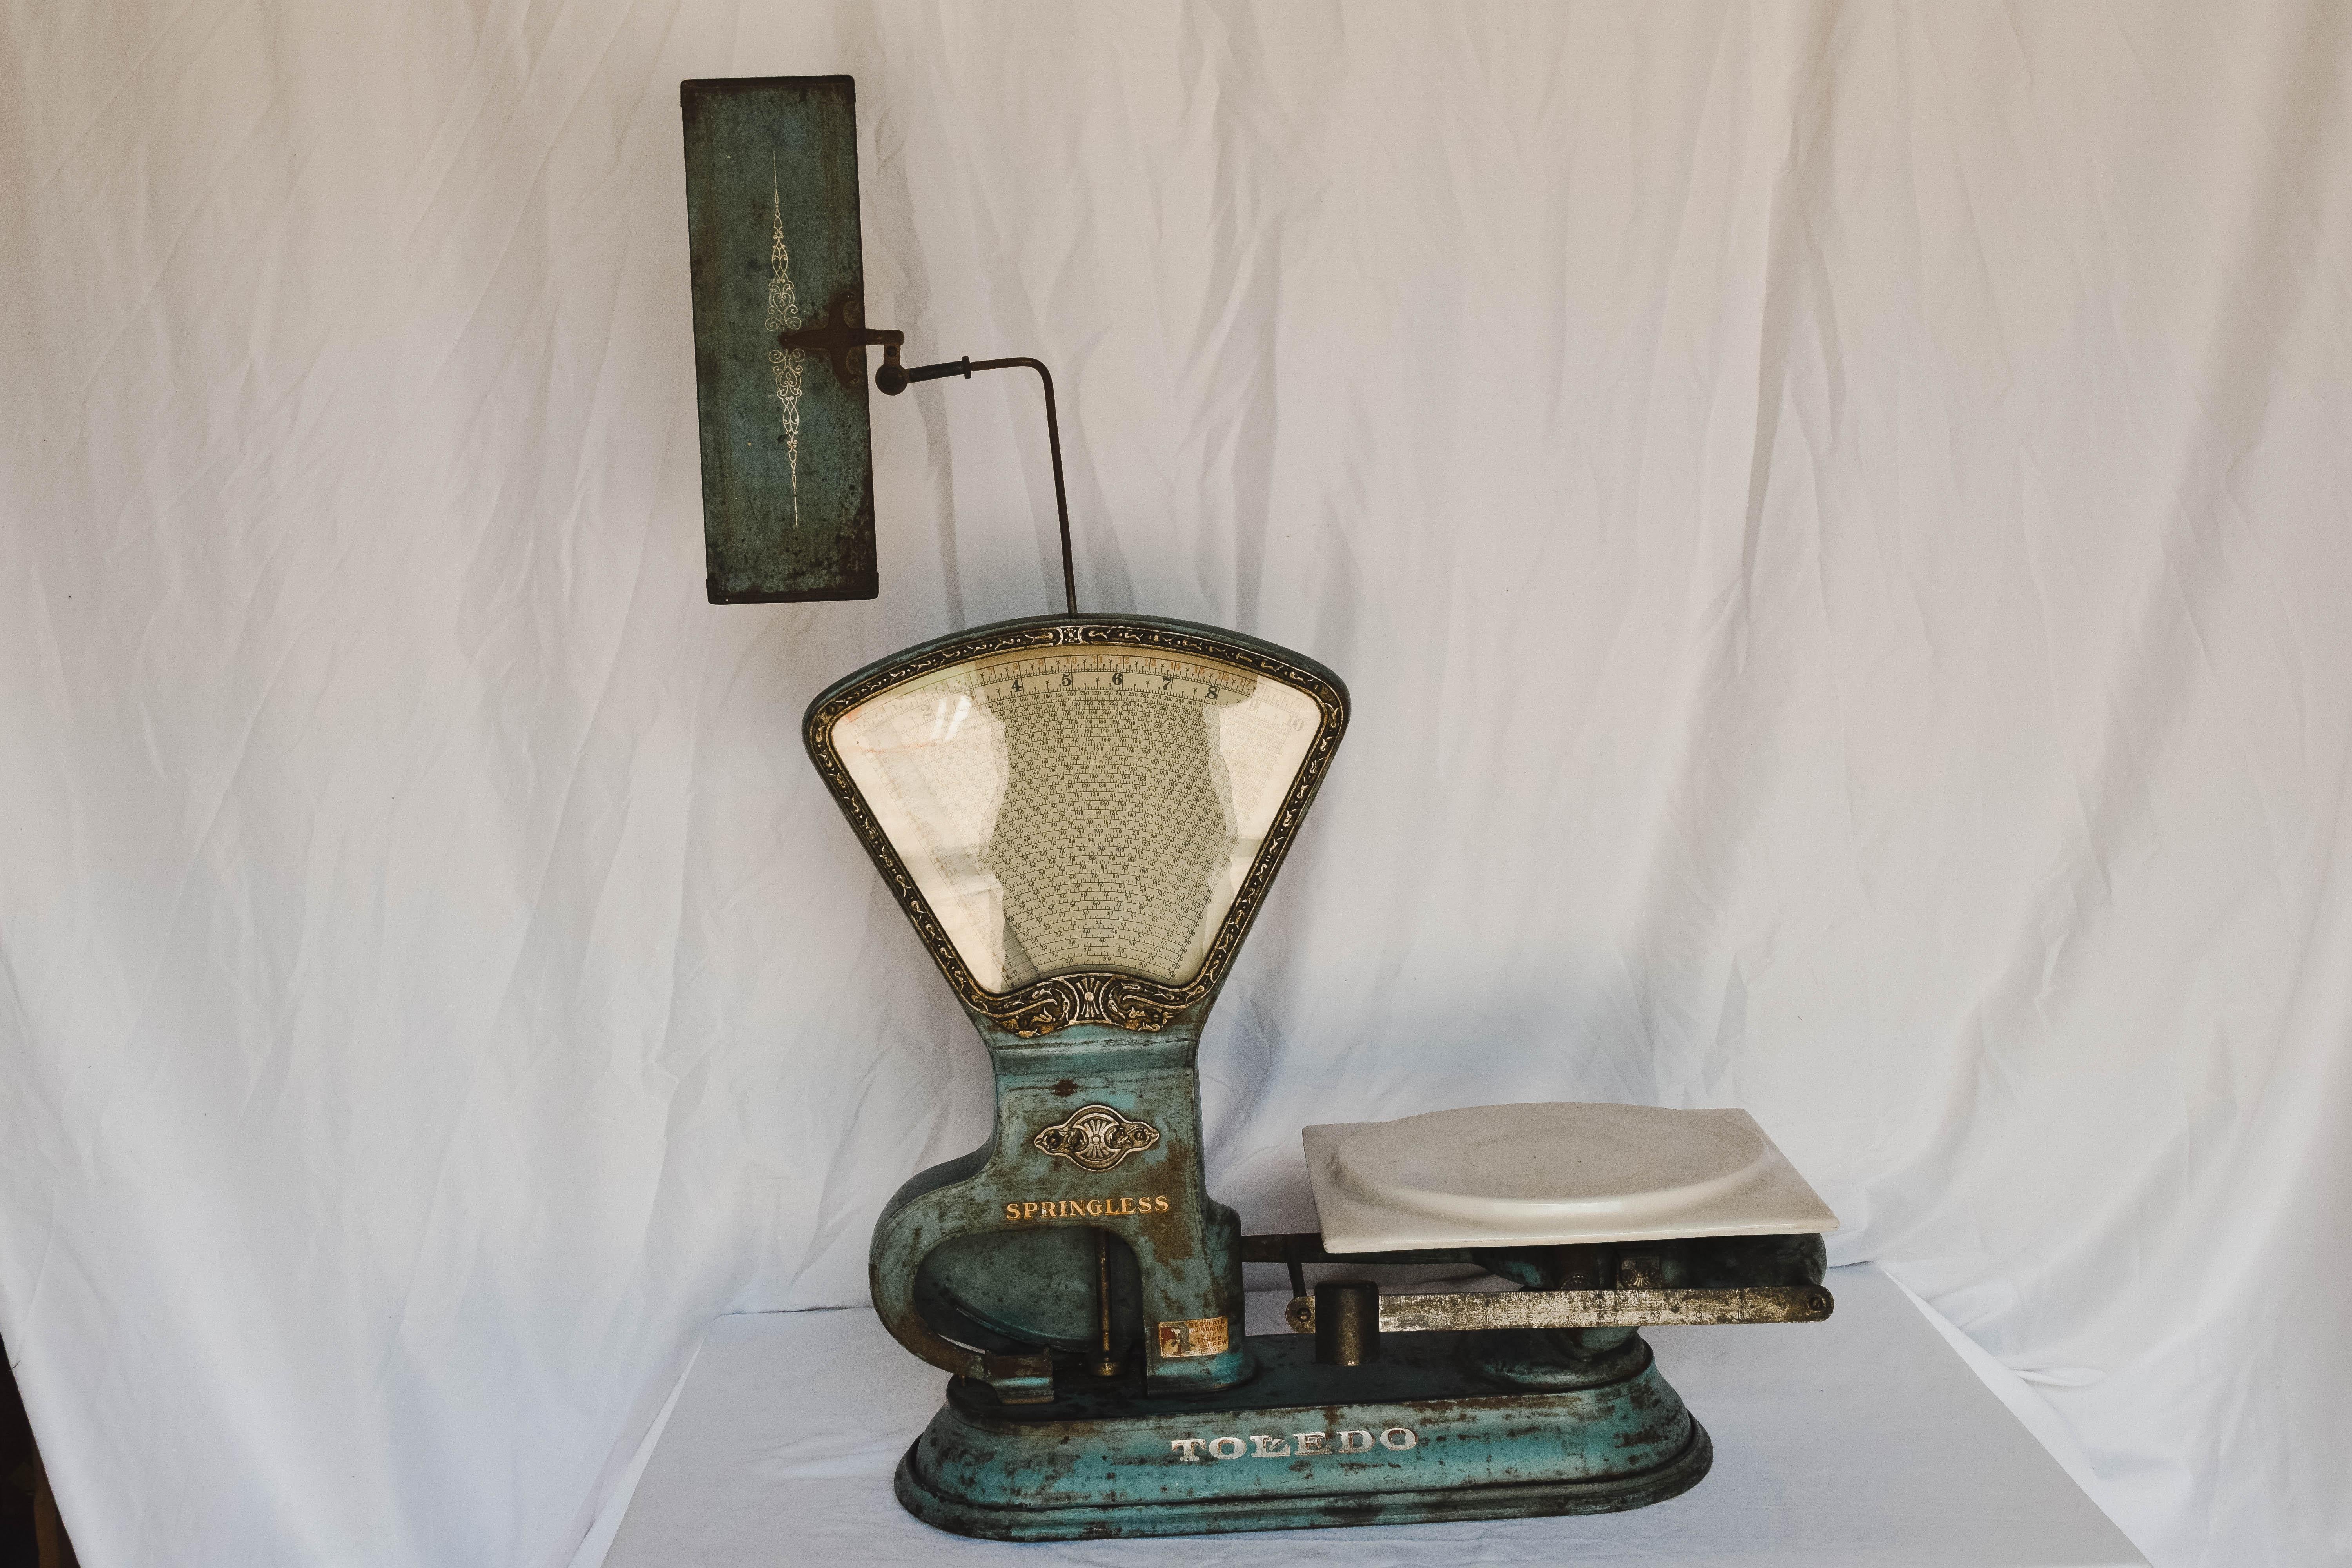 This antique Toledo springless computing store scale is a wonderful display piece. With its aged original robin egg blue patina it has beautiful nickel and brass details.